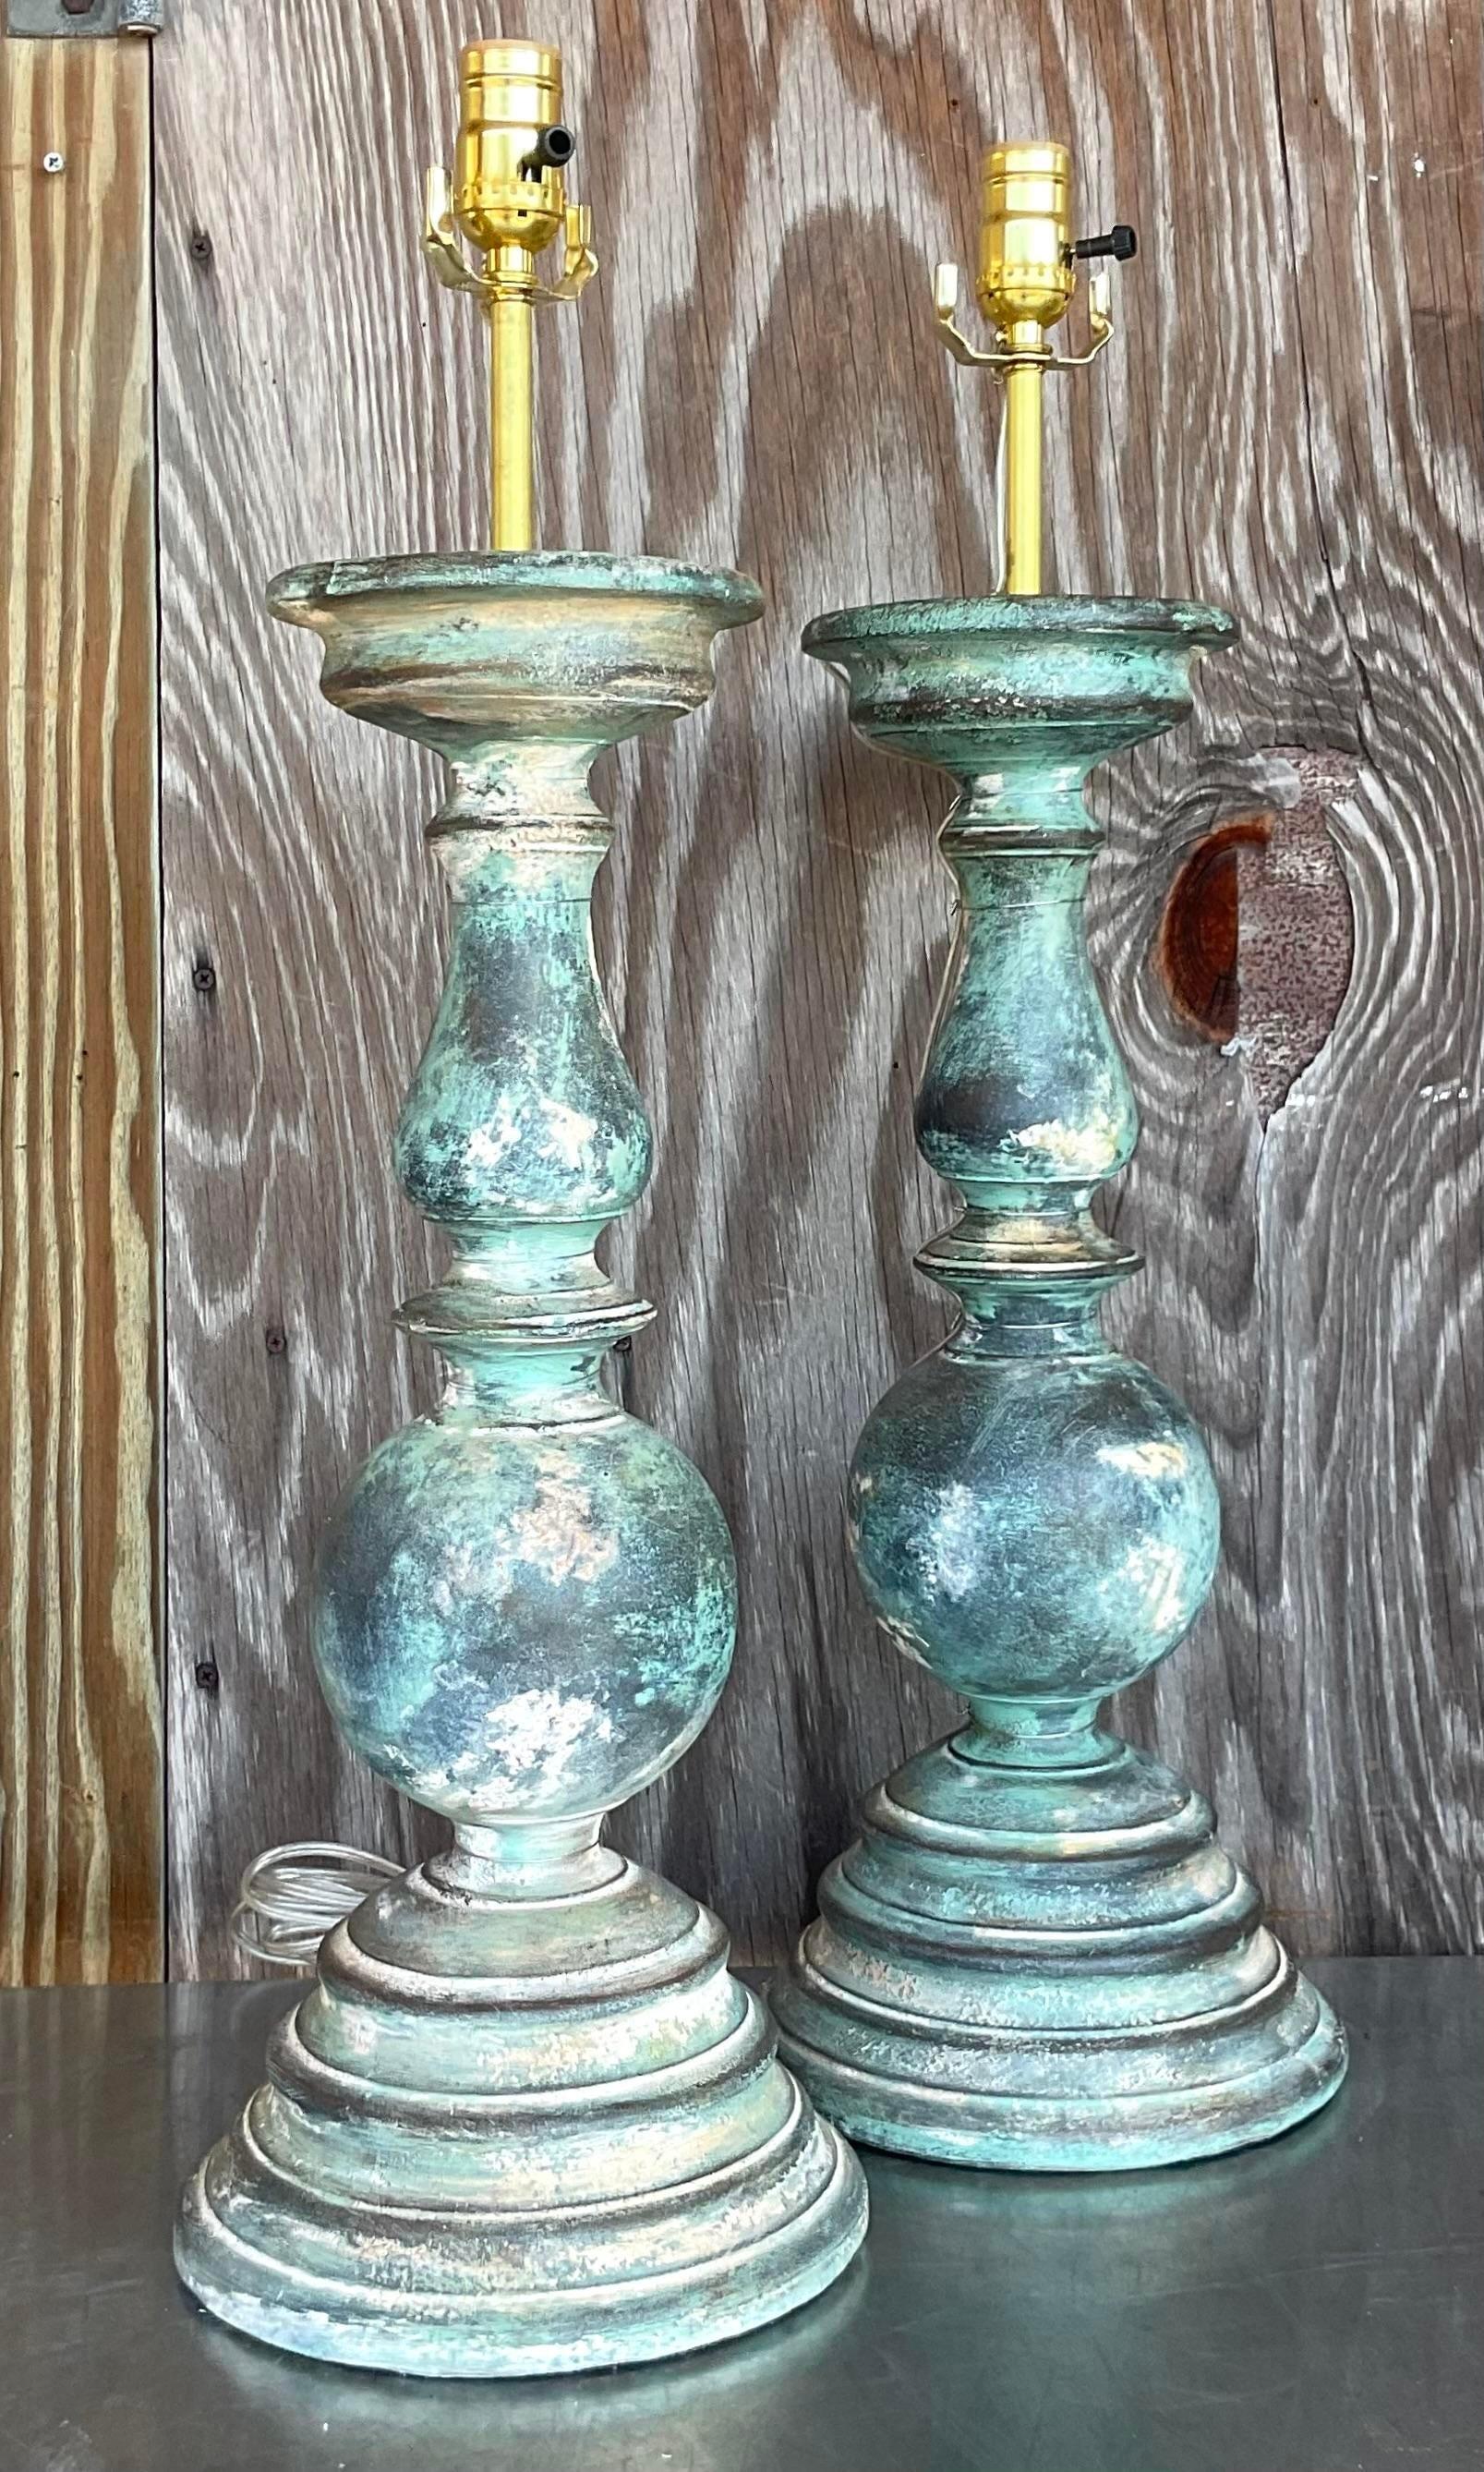 20th Century Vintage Boho Hand Painted Balustrade Lamps - a Pair For Sale